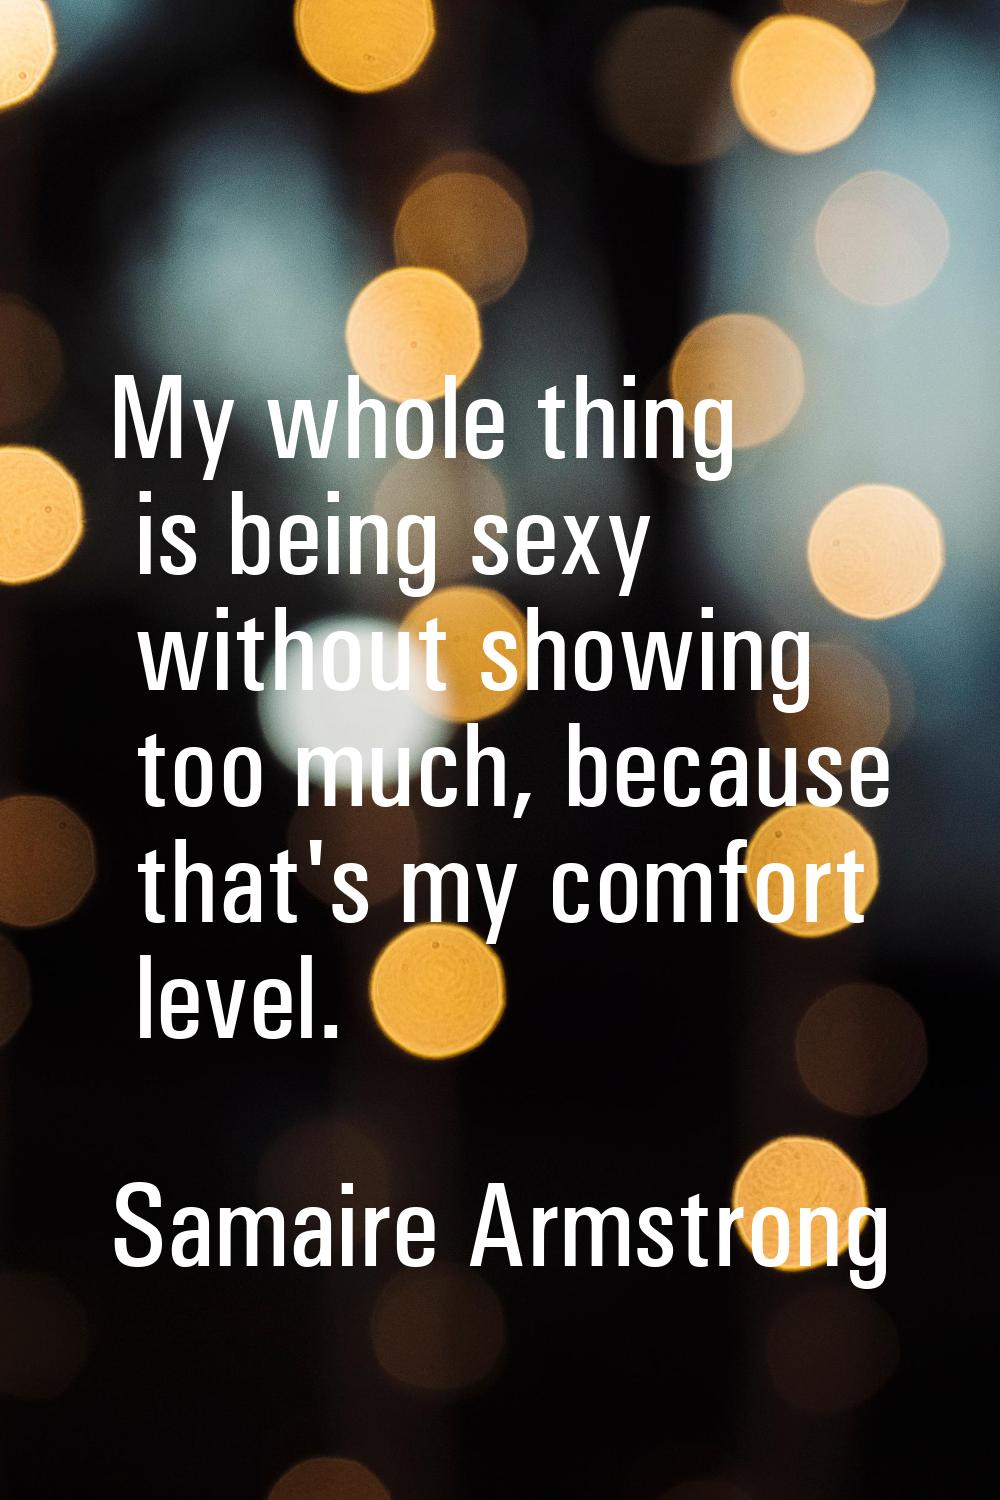 My whole thing is being sexy without showing too much, because that's my comfort level.